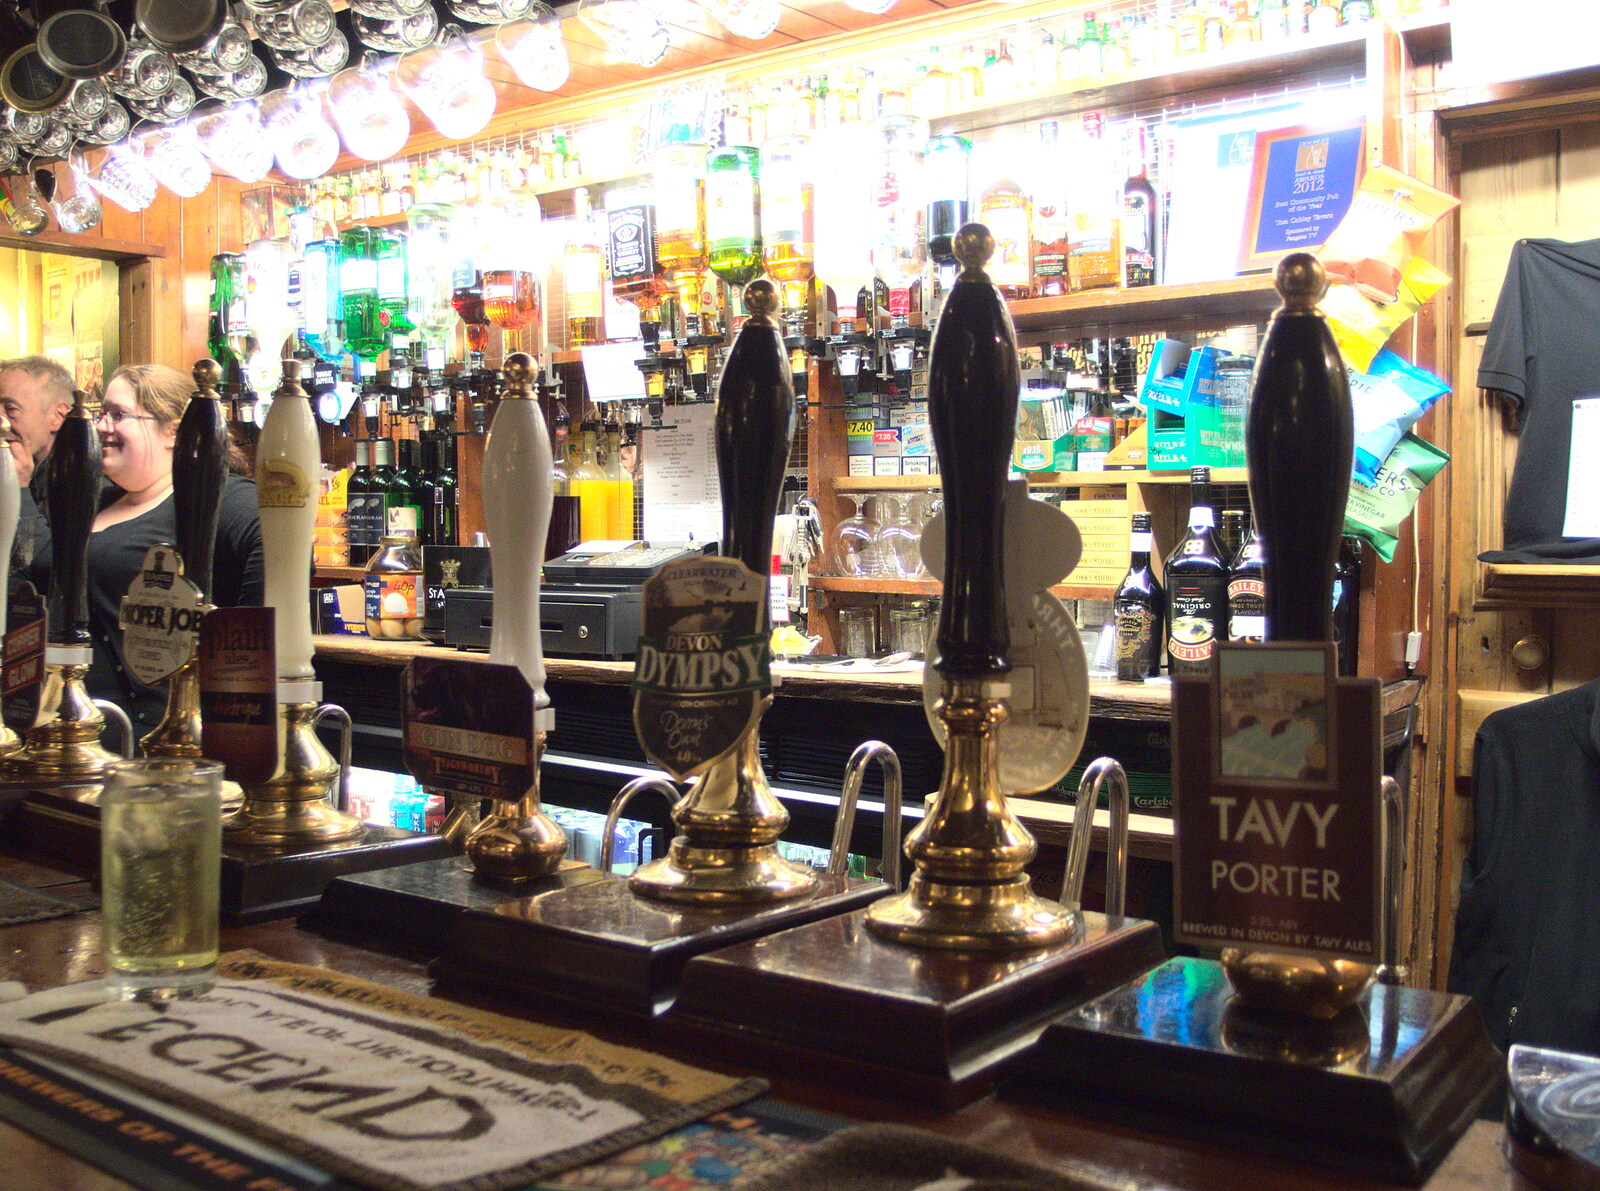 The *eight* beer pumps of the Tom Cobley from A Trip to Grandma J's, Spreyton, Devon - 18th February 2015